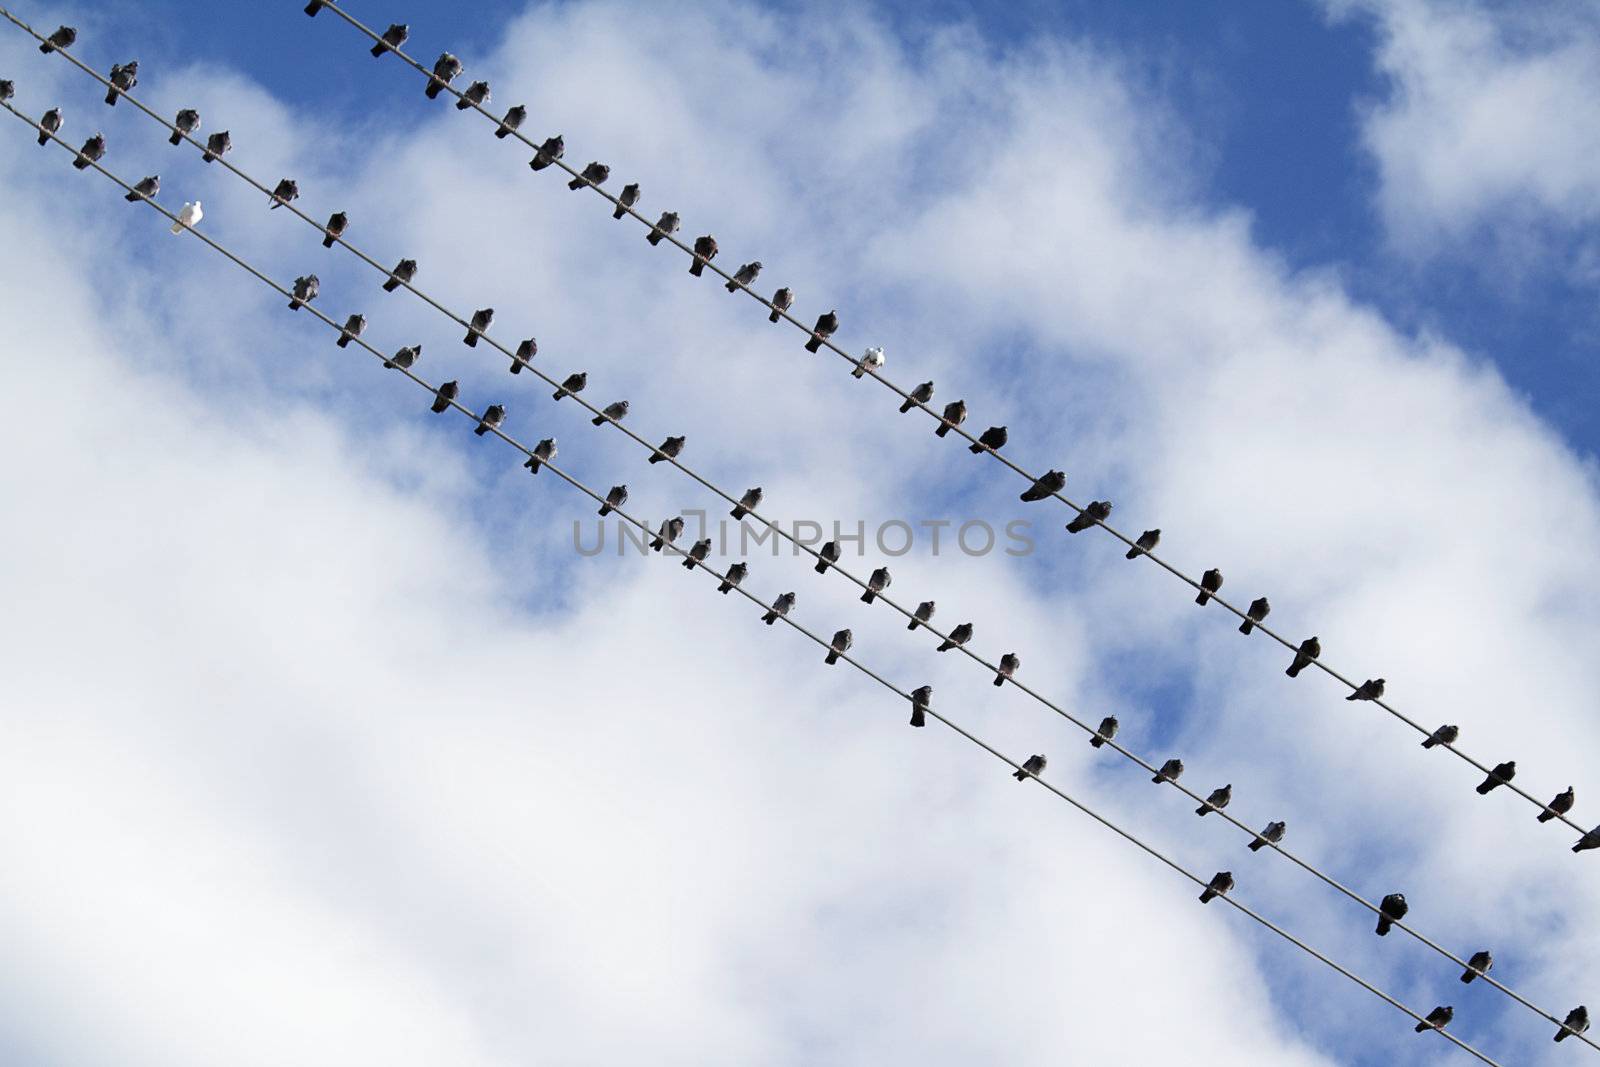 Flock of birds sitting on electric wire with cloudy sky as a background